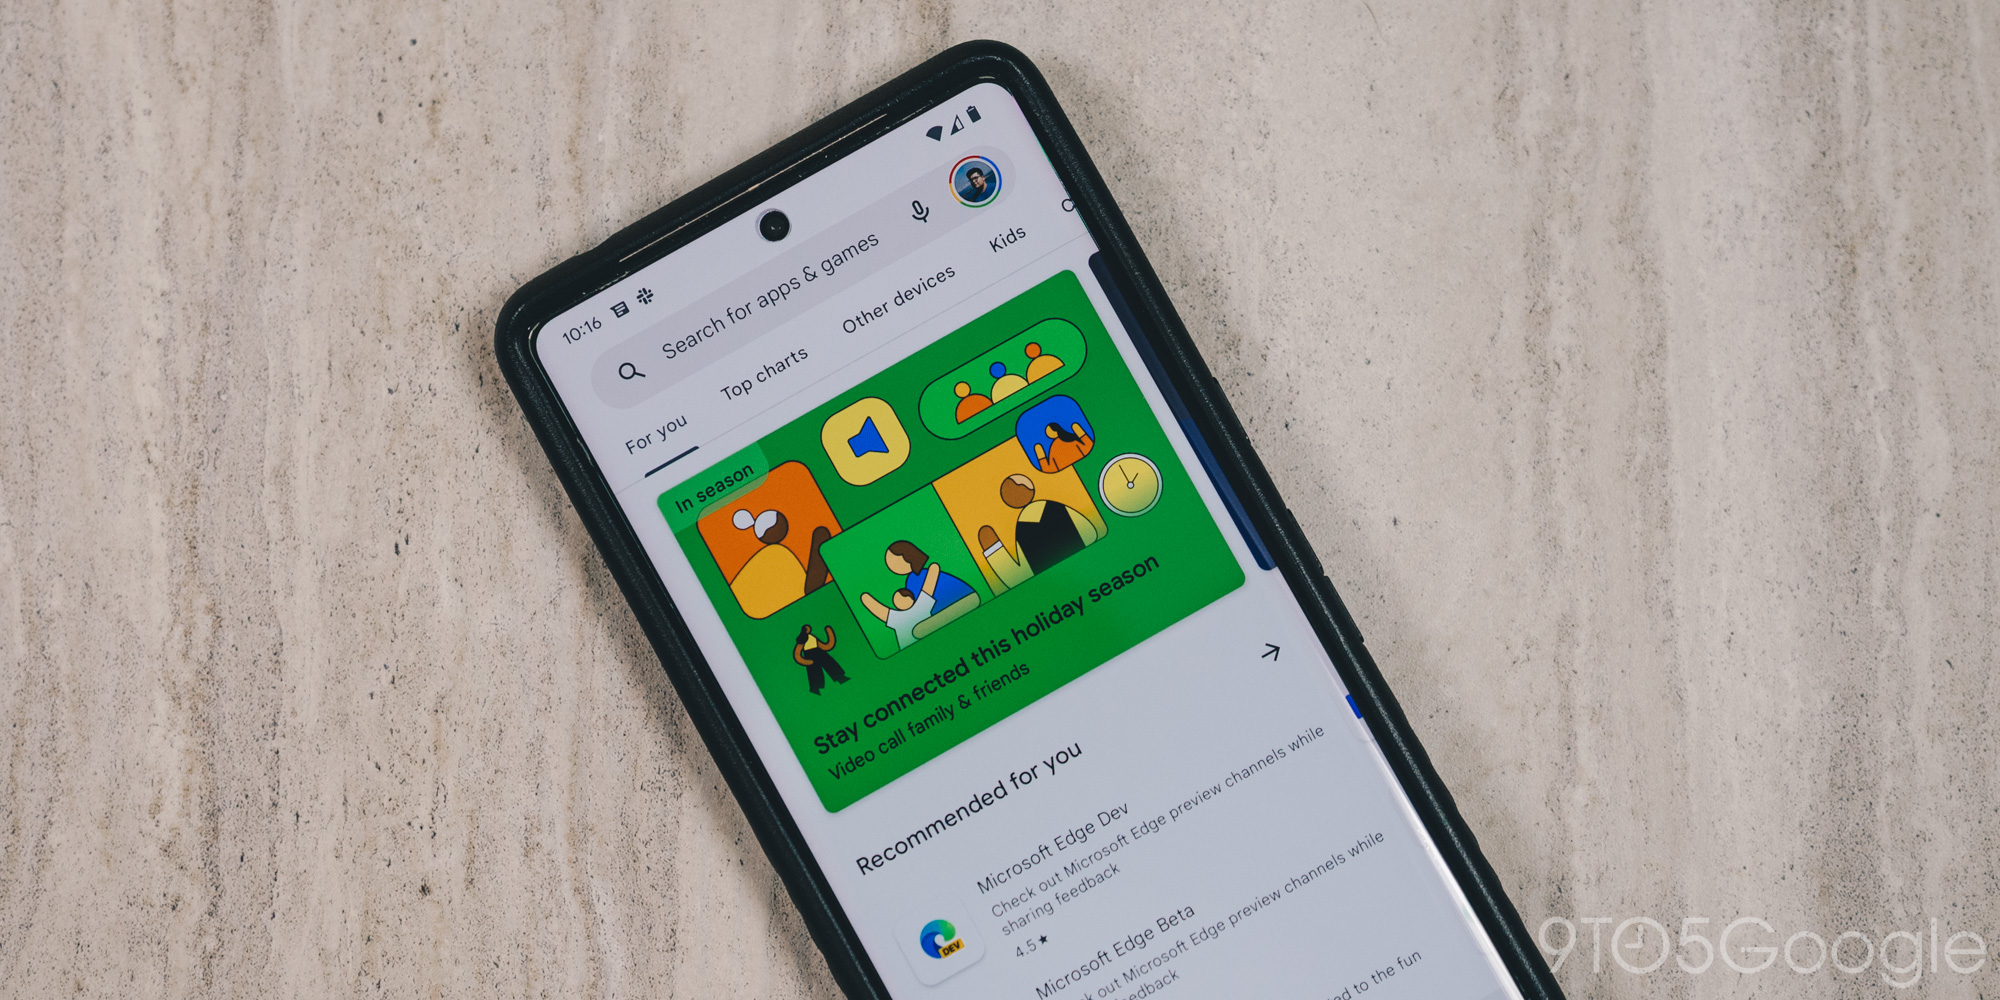 Google Play Store Introduces New Badge to Indicate Android VPN Apps That  Have Passed a Security